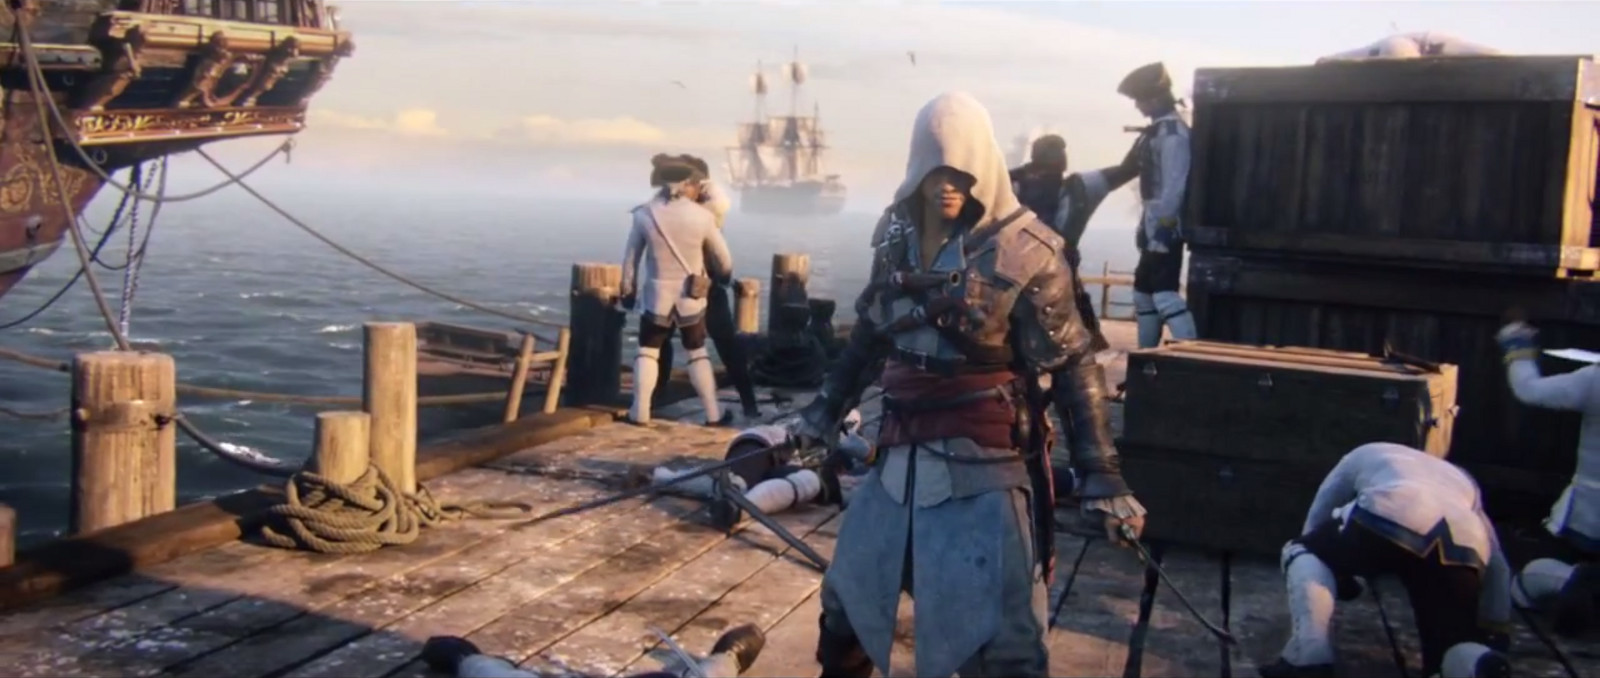 Assassin's Creed IV: Black Flag Preview - Assassin's Creed IV